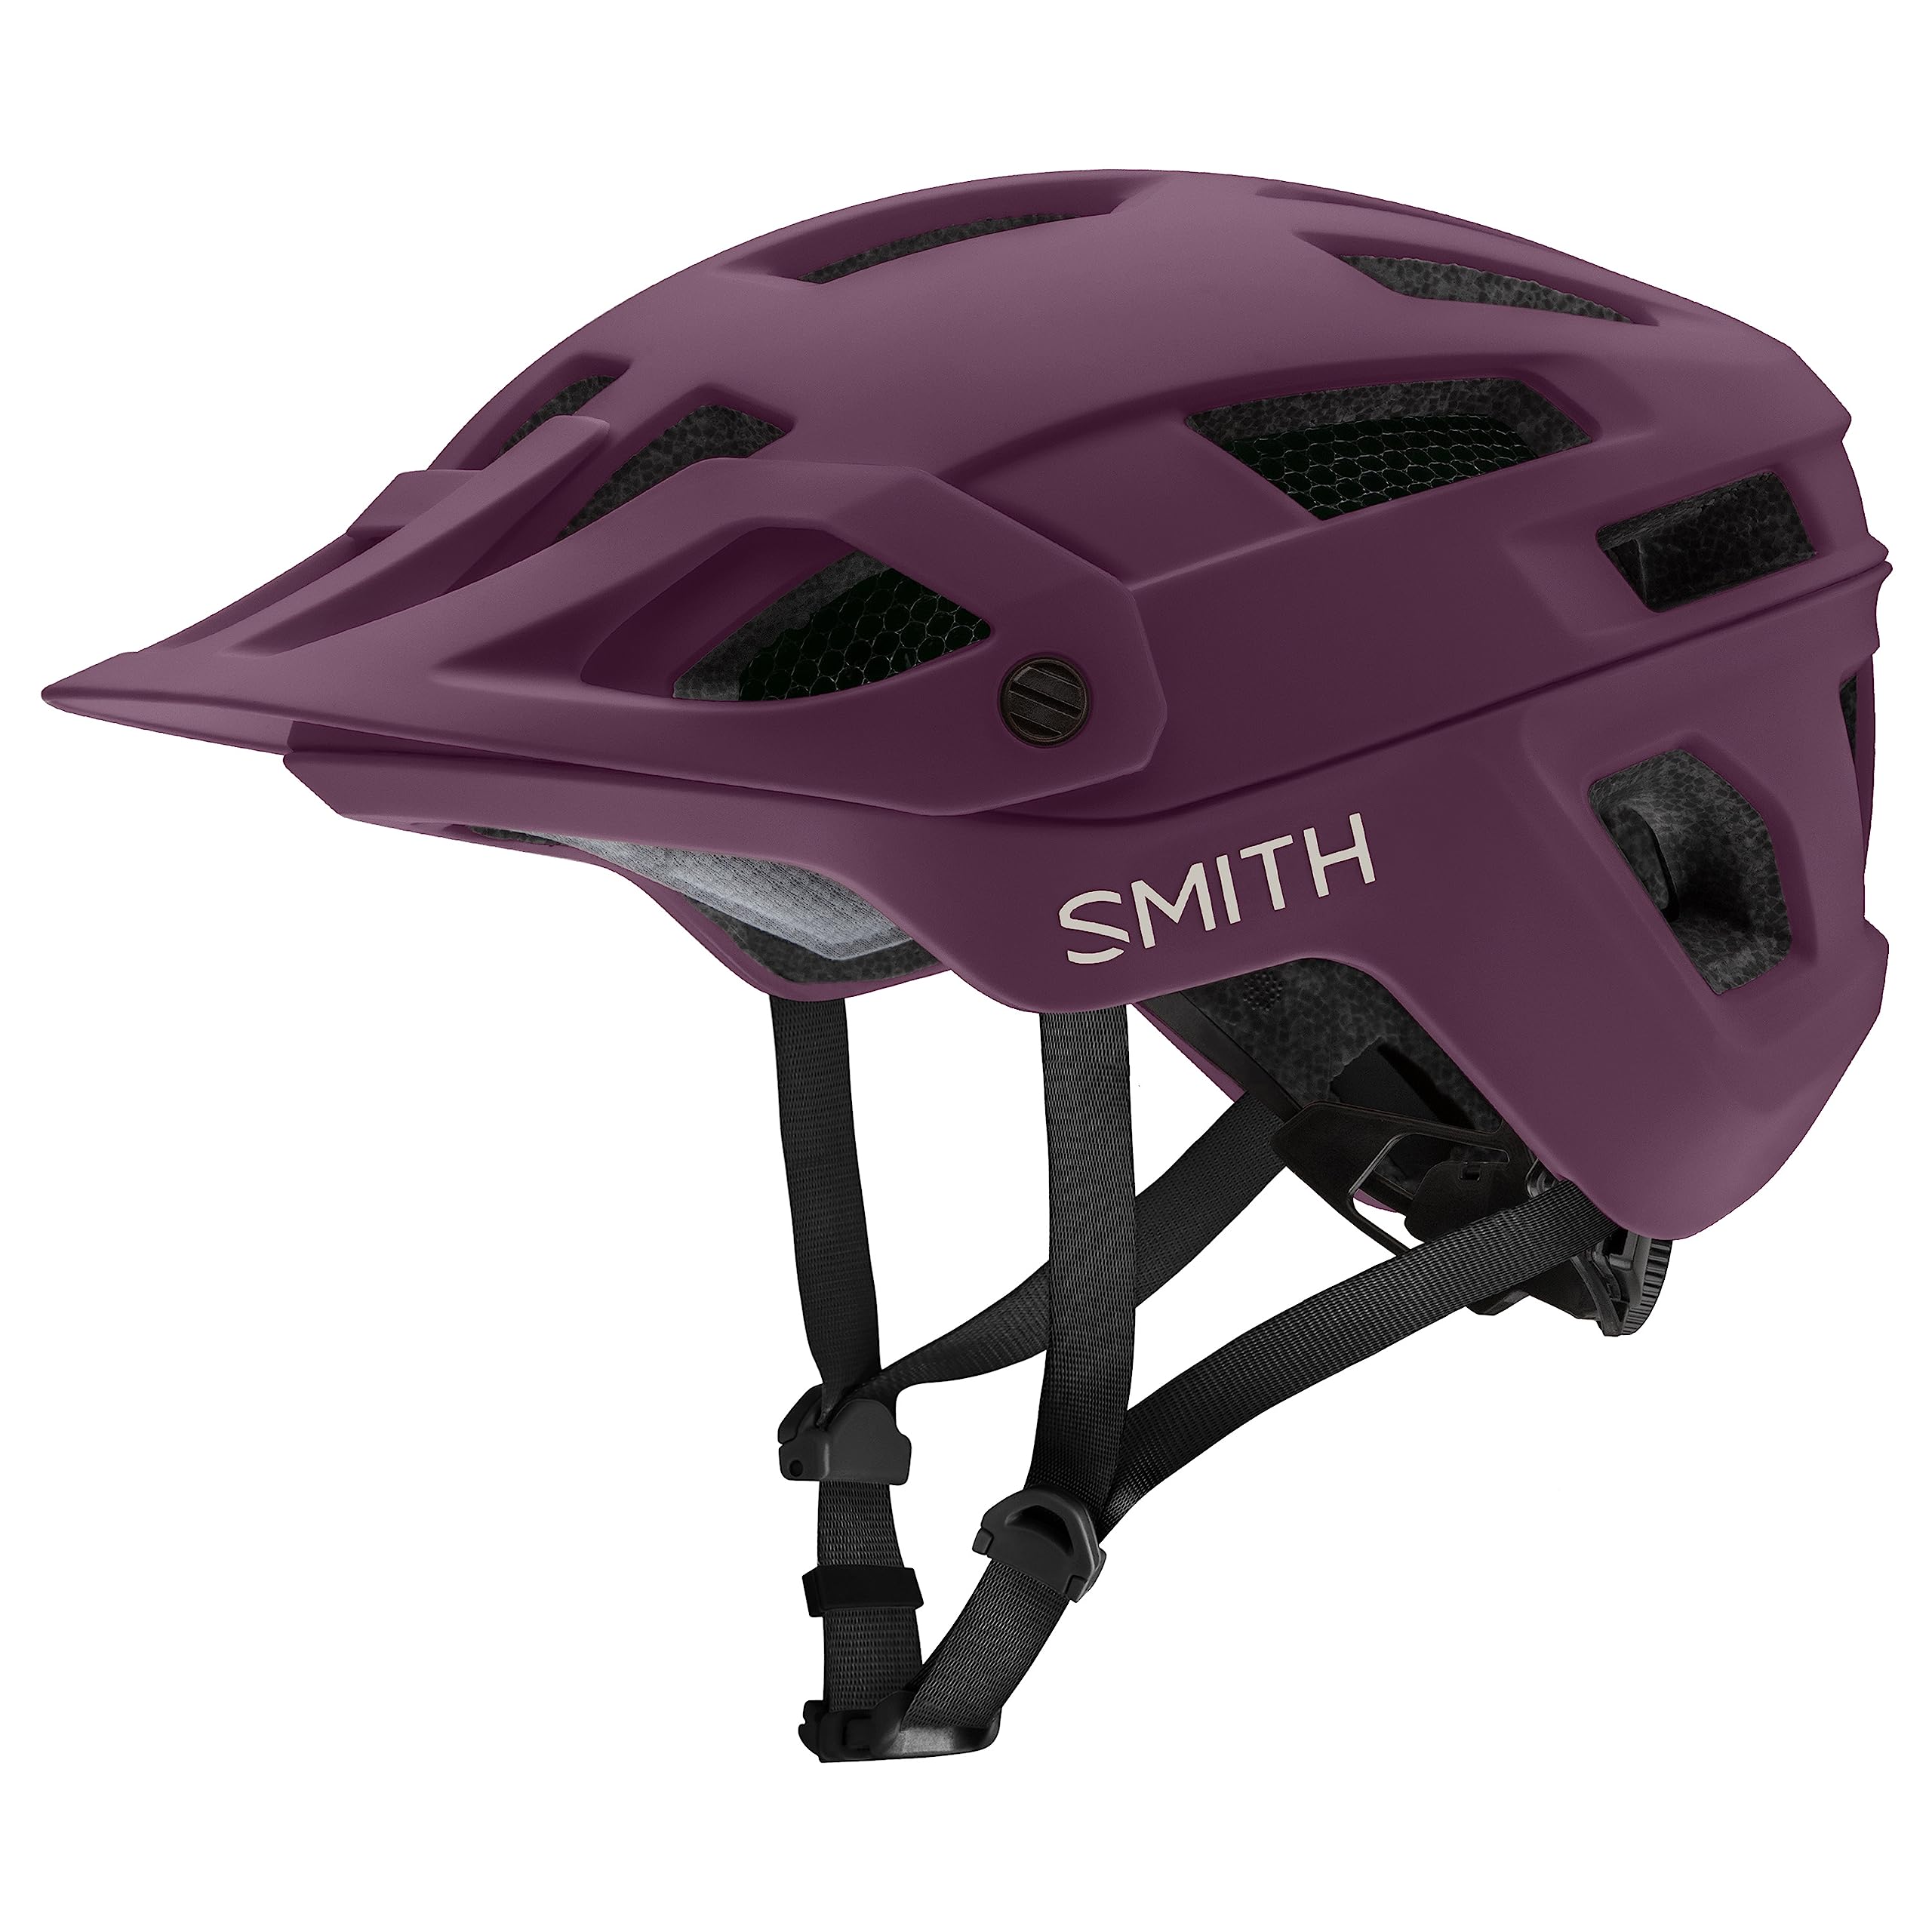 SMITH Engage MTB Cycling Helmet Adult Mountain Bike Helmet with MIPS Technology Koroyd Coverage Lightweight Impact